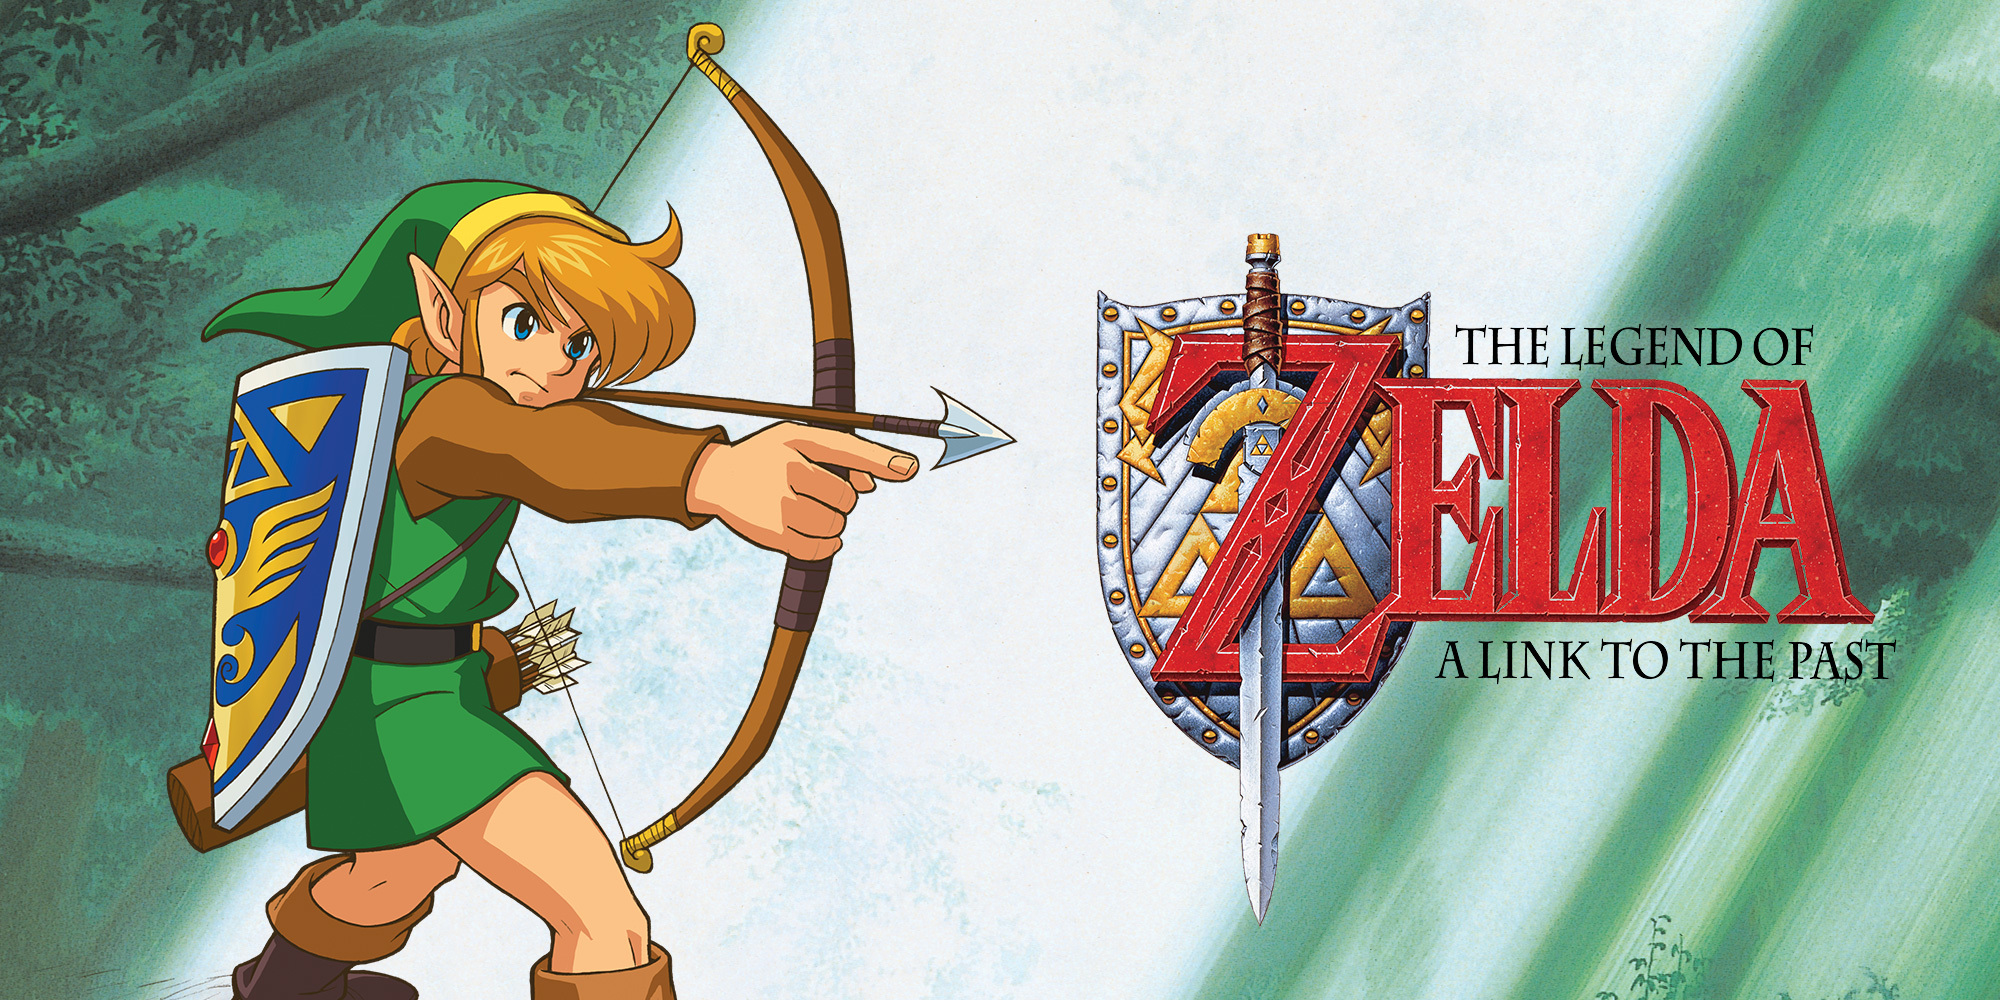 The Legend of Zelda: A Link to the Past. Nintendo.